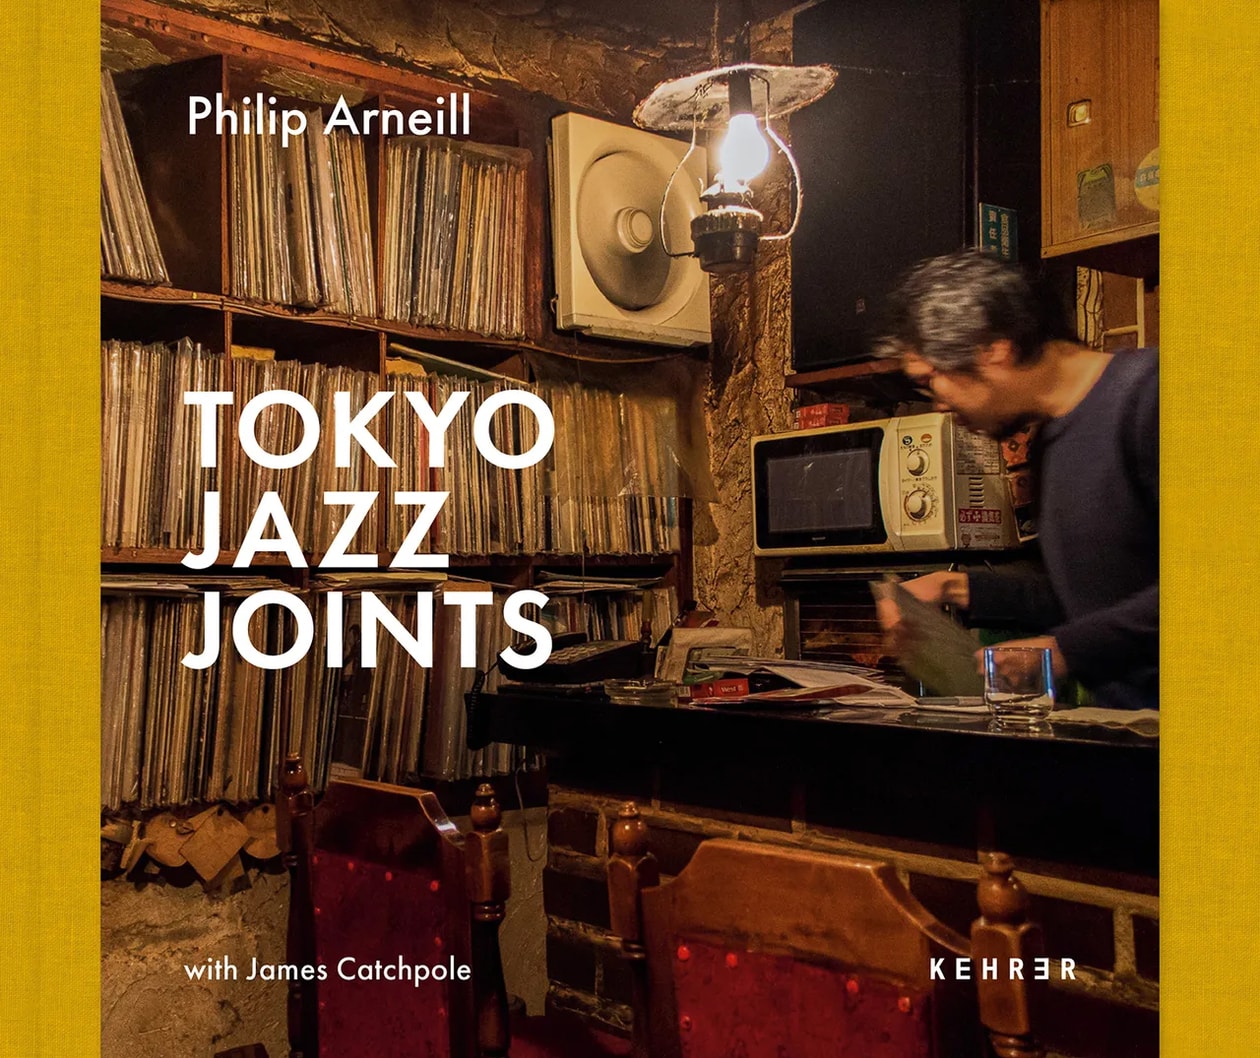 tokyo jazz japanese kissa bar coffe shop listening culture book Philip Arneill James Catchpole official release date info photos price store list buying guide